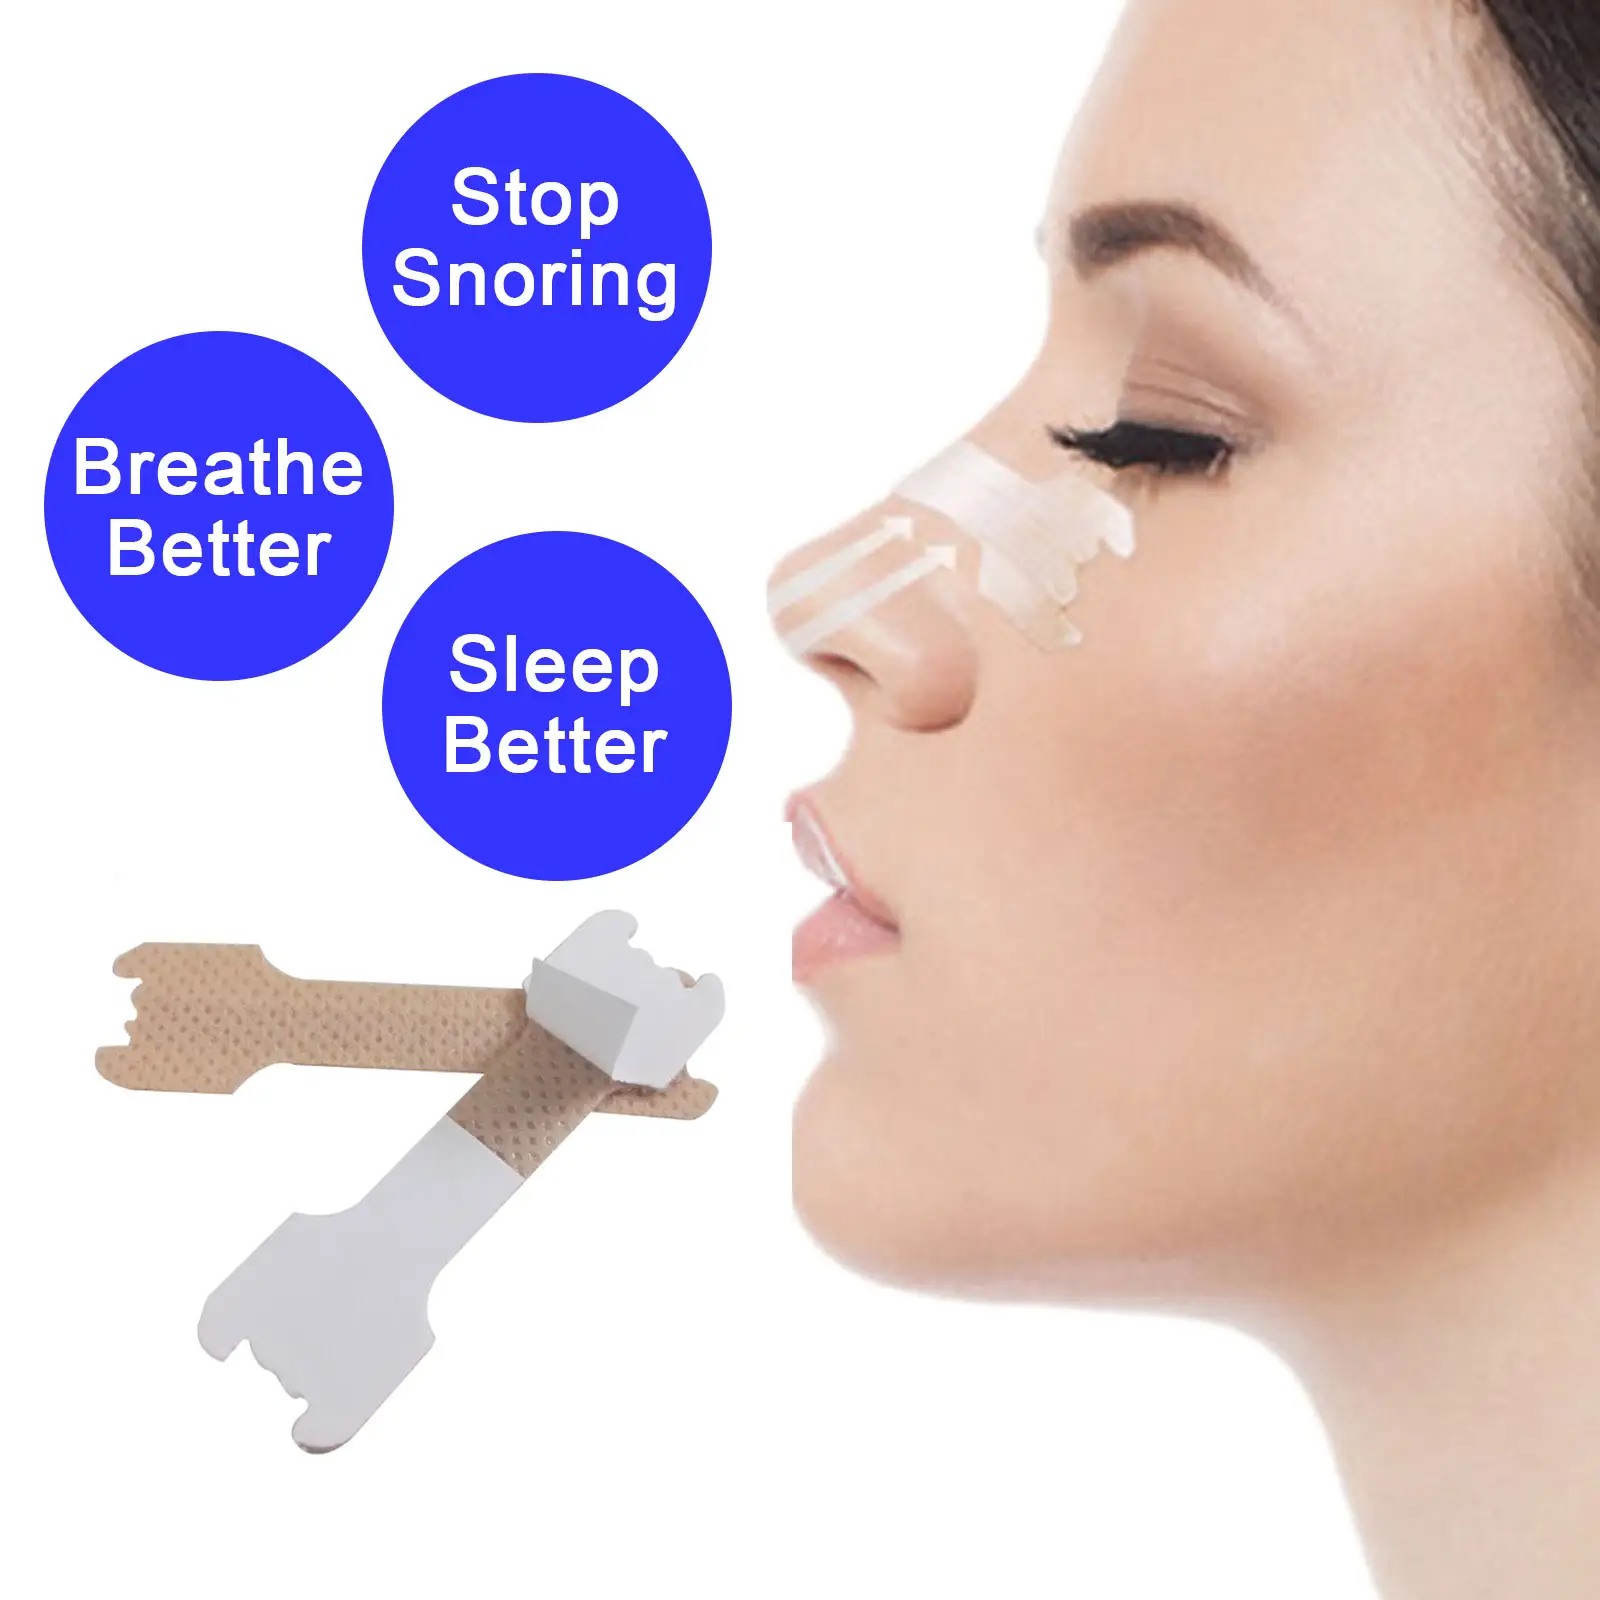 2022 New Products Breathe Right Adhesive Nasal Strip Anti Snoring Patch Mouth For Sleeping Better